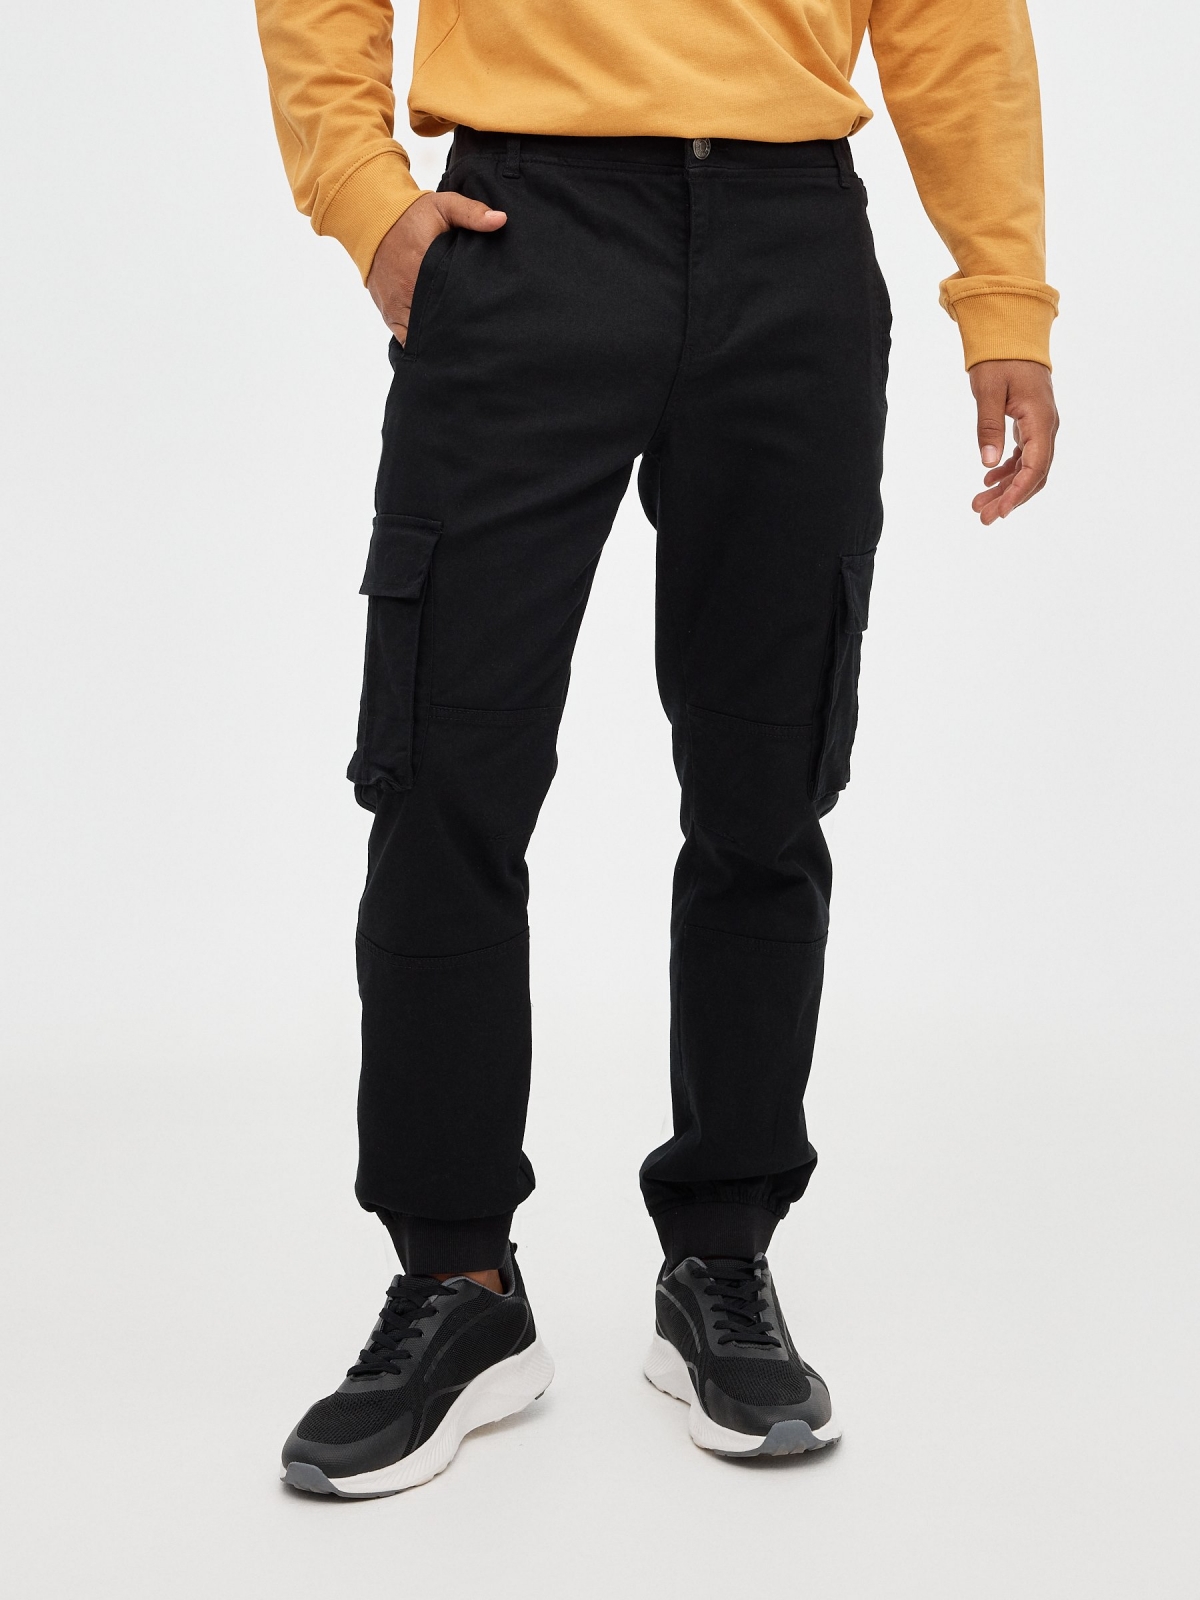 Jogger pants with pocket legs black middle front view